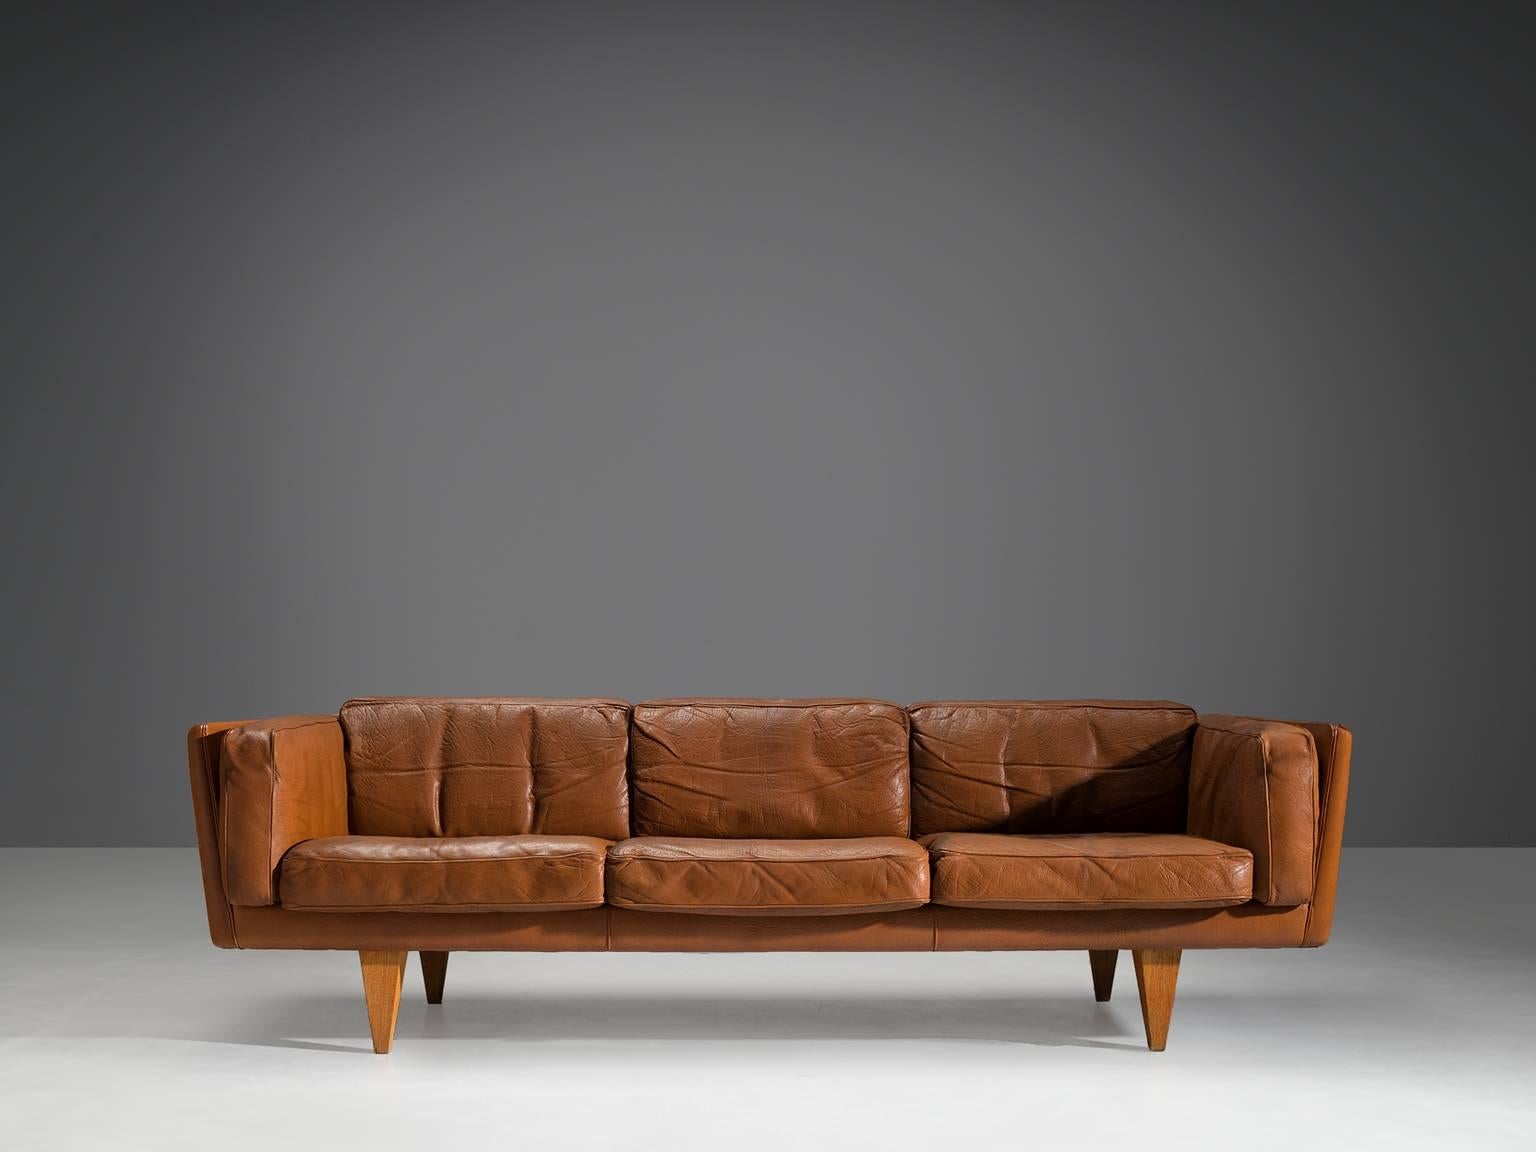 Illum Wikkelsø, sofa model 'V11' in cognac leather and wood, Denmark, 1960s.

This three-seat sofa is designed by Danish designer Illum Wikkelsø. Highly comfortable and beautiful designed sofa with original leather upholstery. The cognac leather